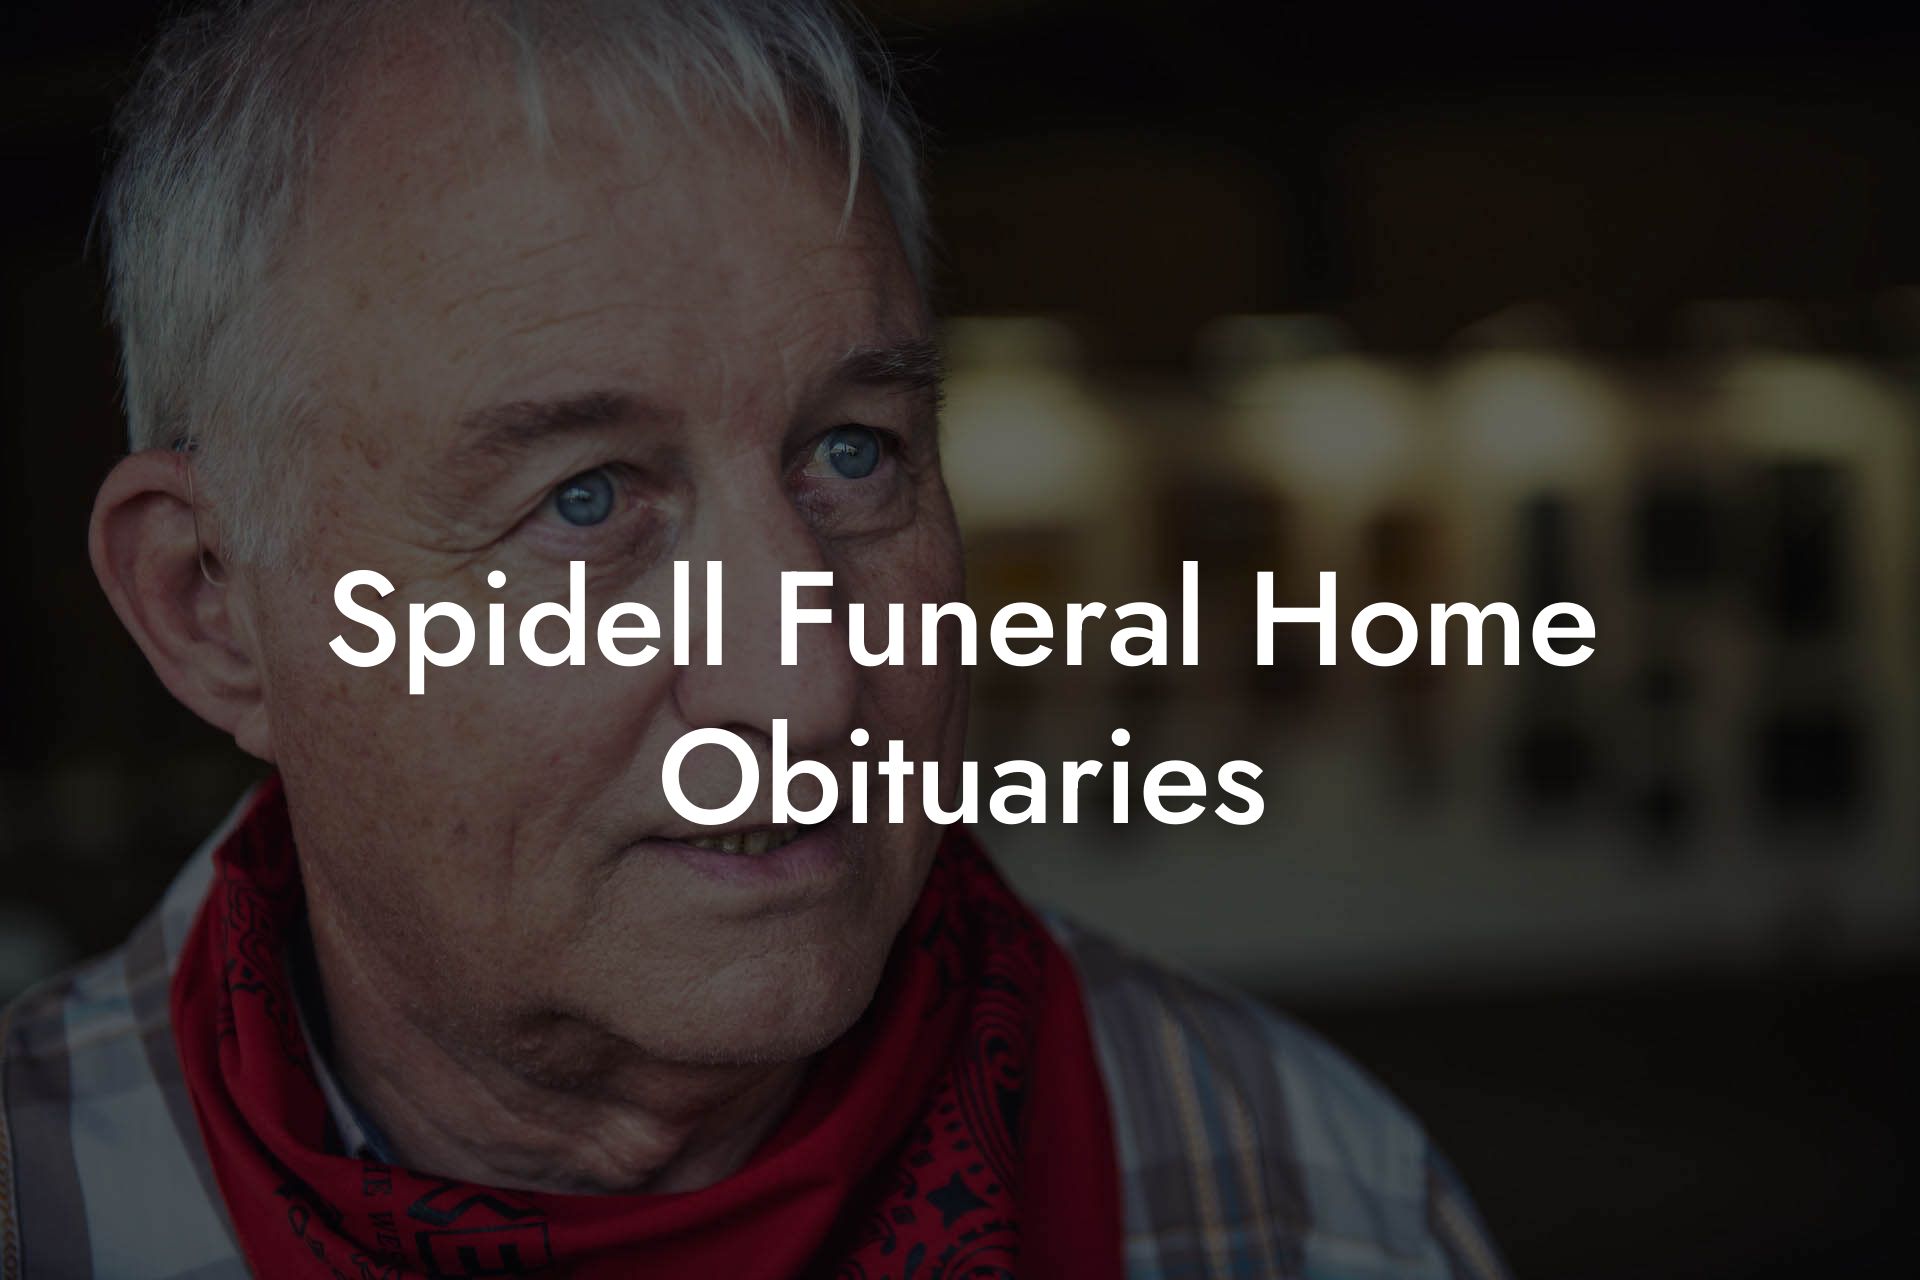 Spidell Funeral Home Obituaries